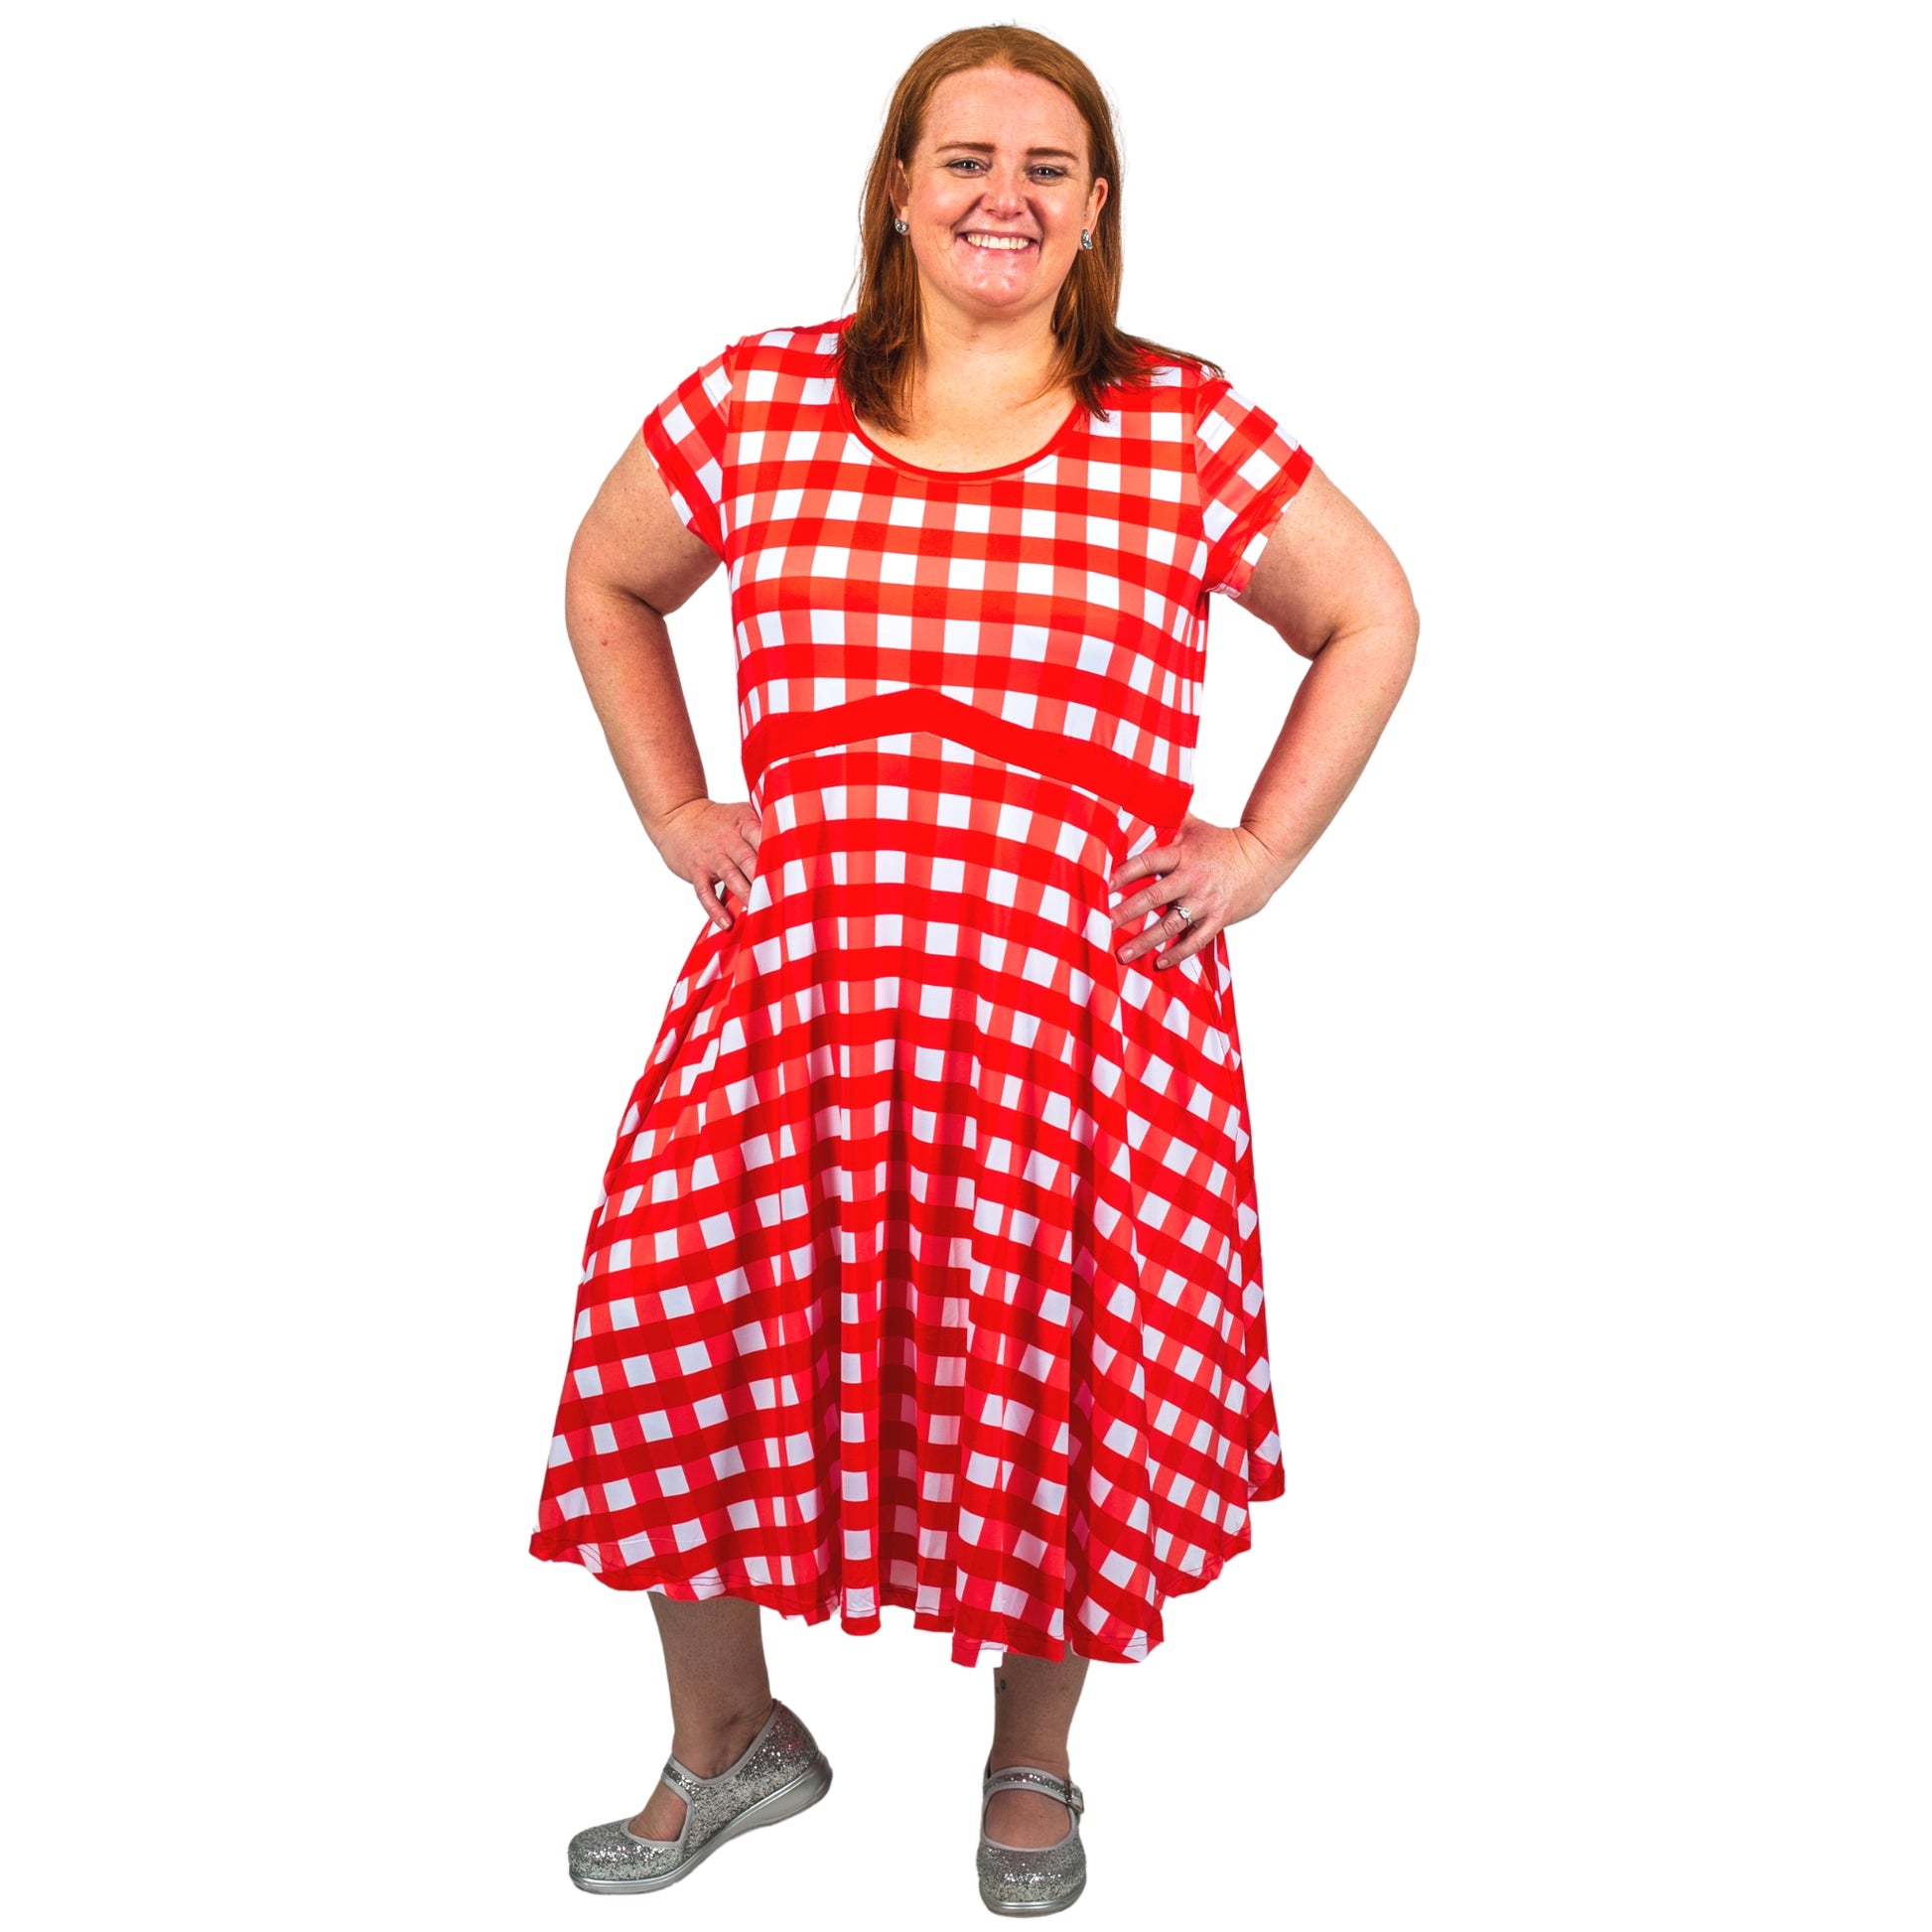 Red Gingham Tea Dress by RainbowsAndFairies.com (Check - Picnic - Dress With Pockets - Rockabilly  - Vintage Inspired) - SKU: CL_TEADR_GINGH_RED - Pic 04